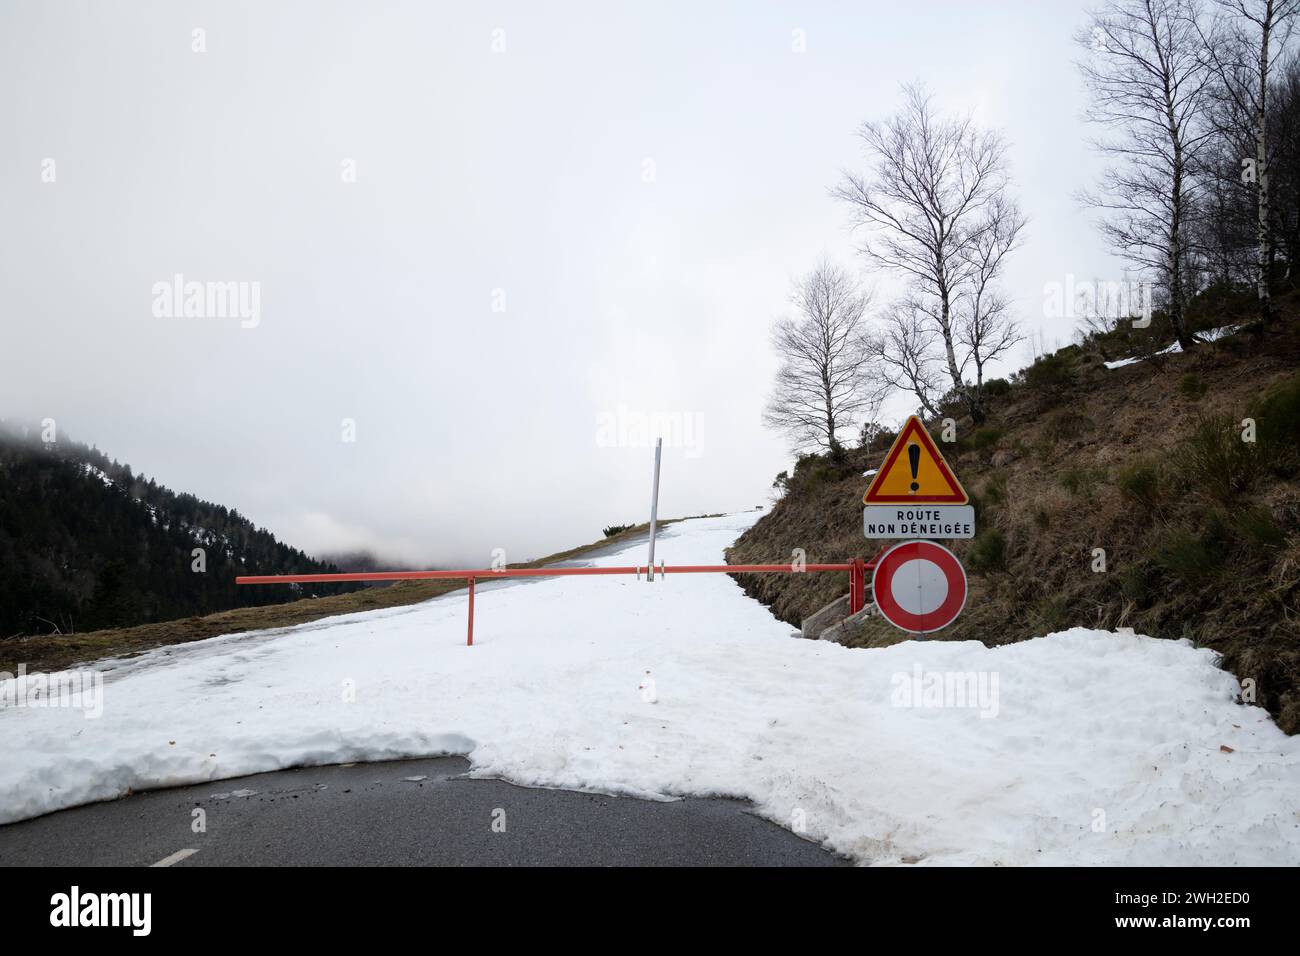 January 31st, 2024, Ascou, Pyrenees, France. Closed road with French sign 'Route non déneigée' meaning Unplowed road Stock Photo